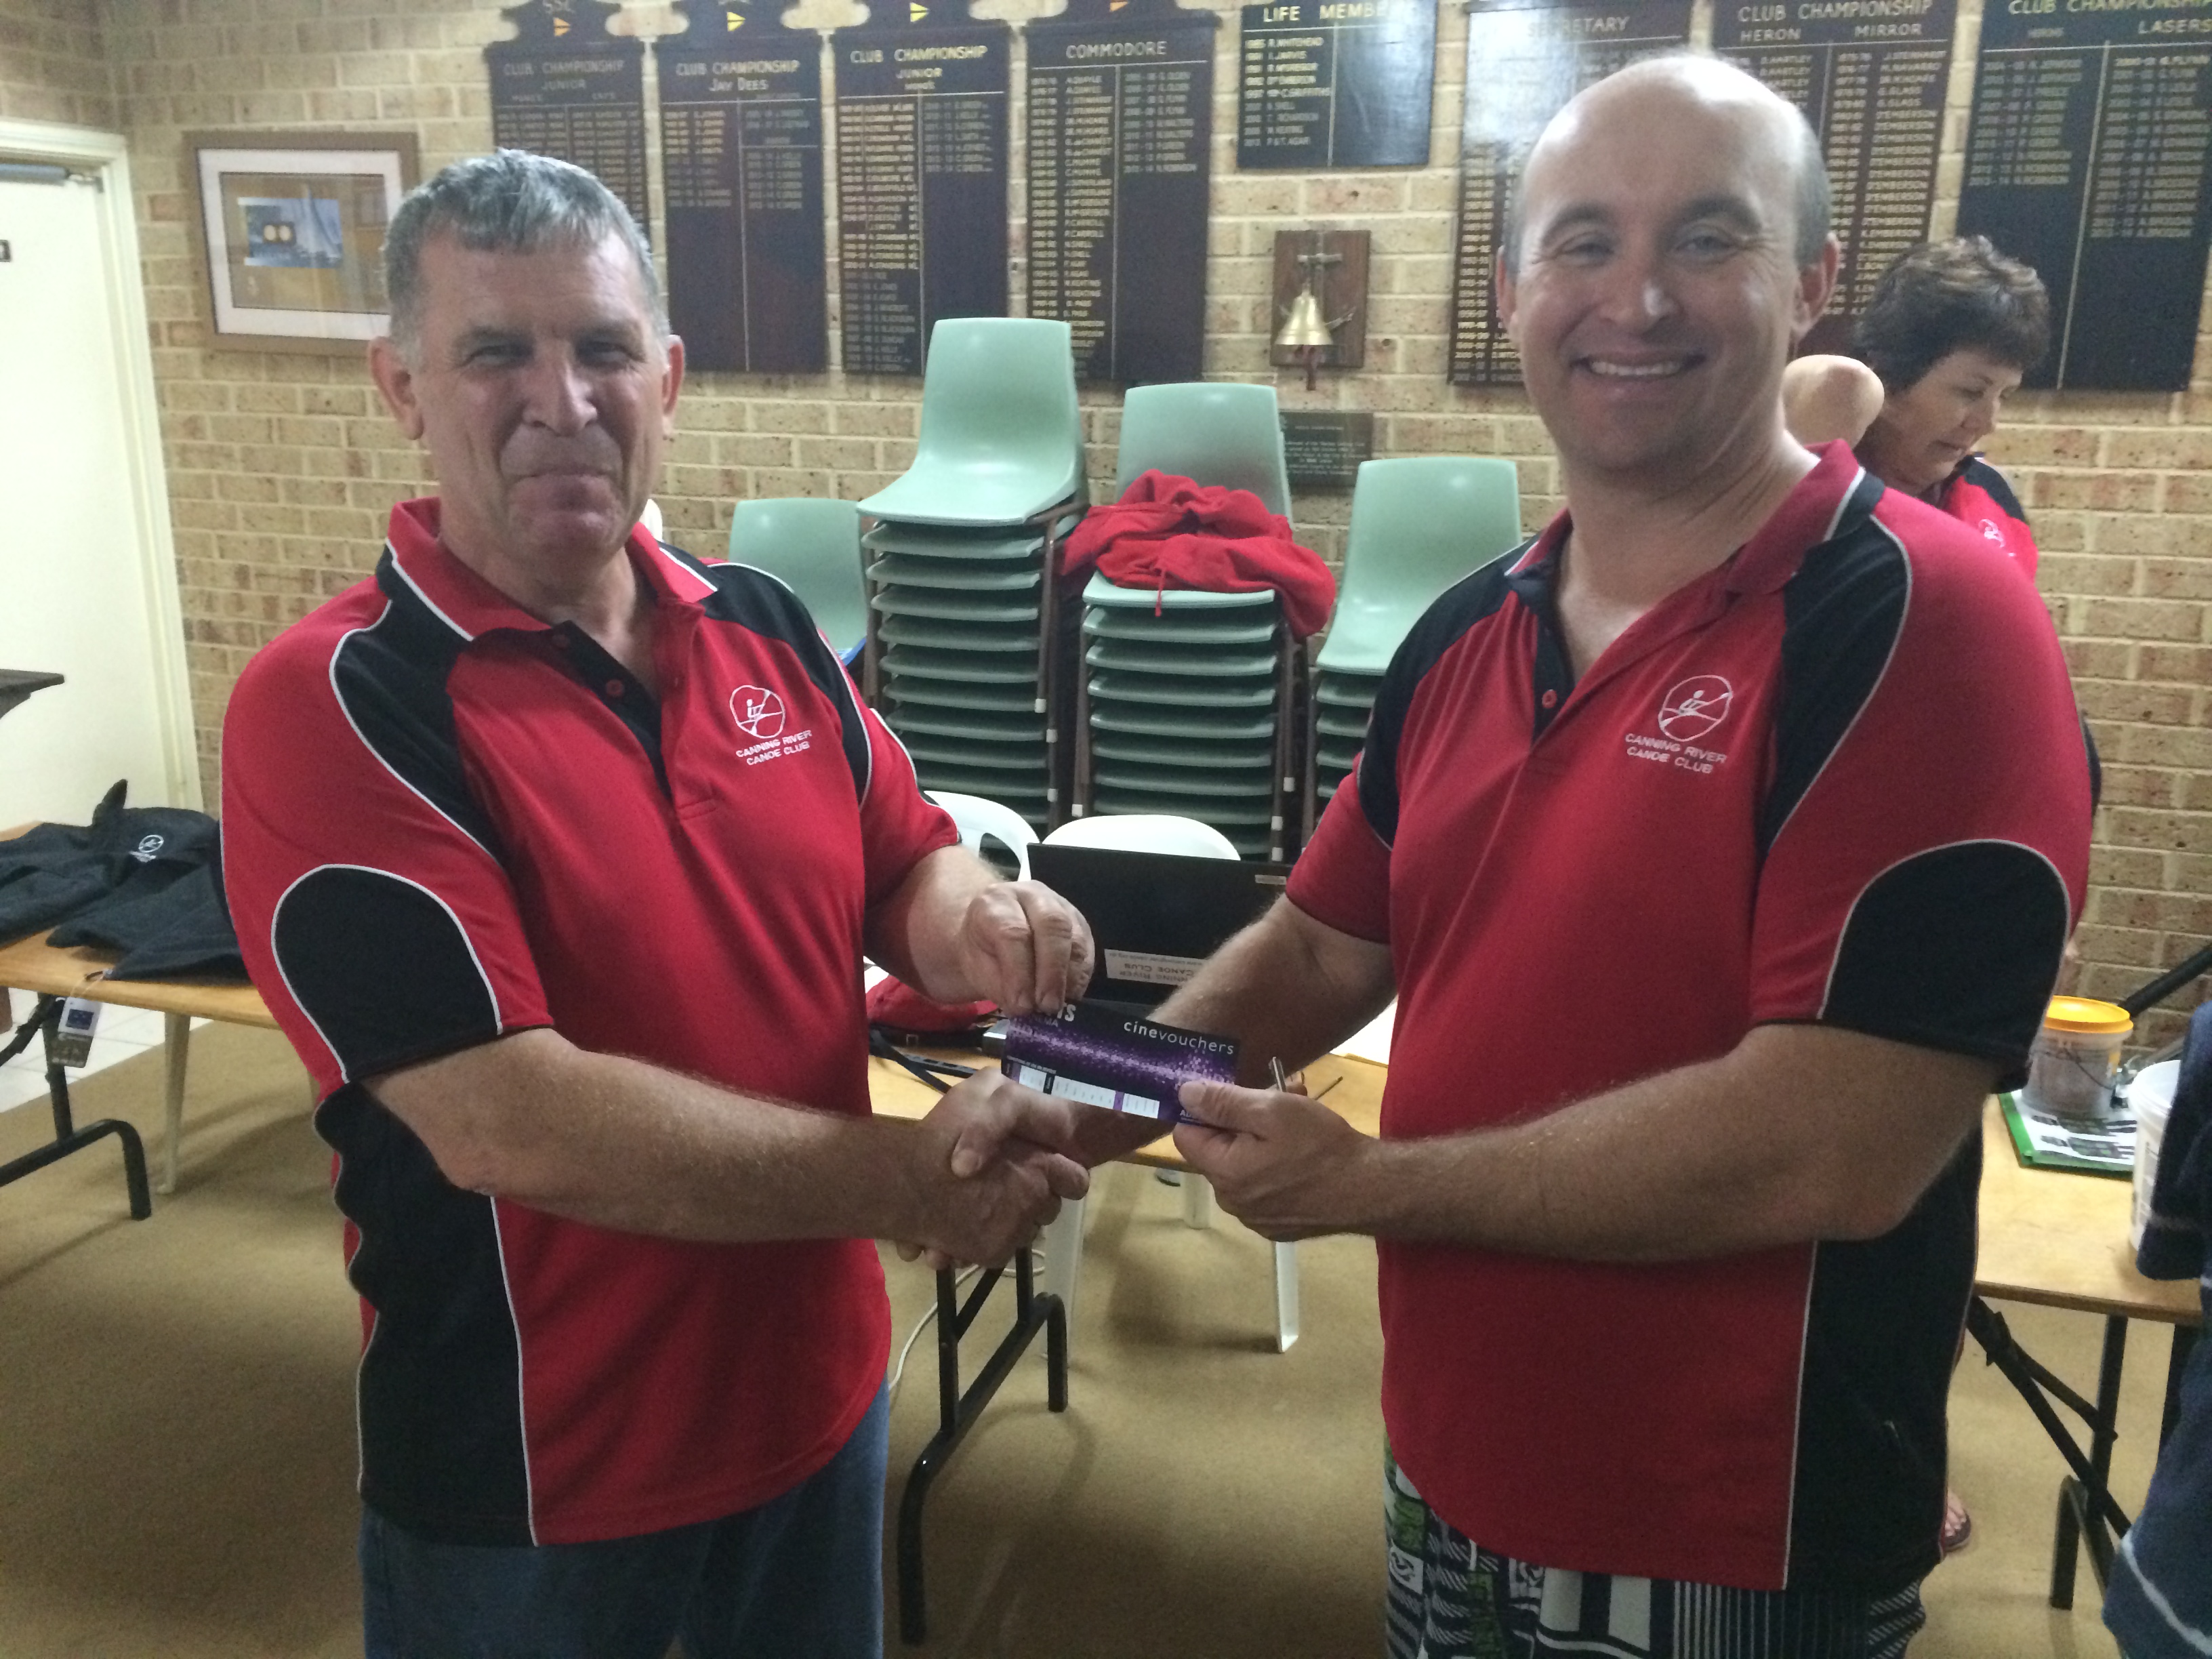 Tuesday 28th April 2015 : Dave Brown presenting tonights winner Mike Galanty with a movie voucher